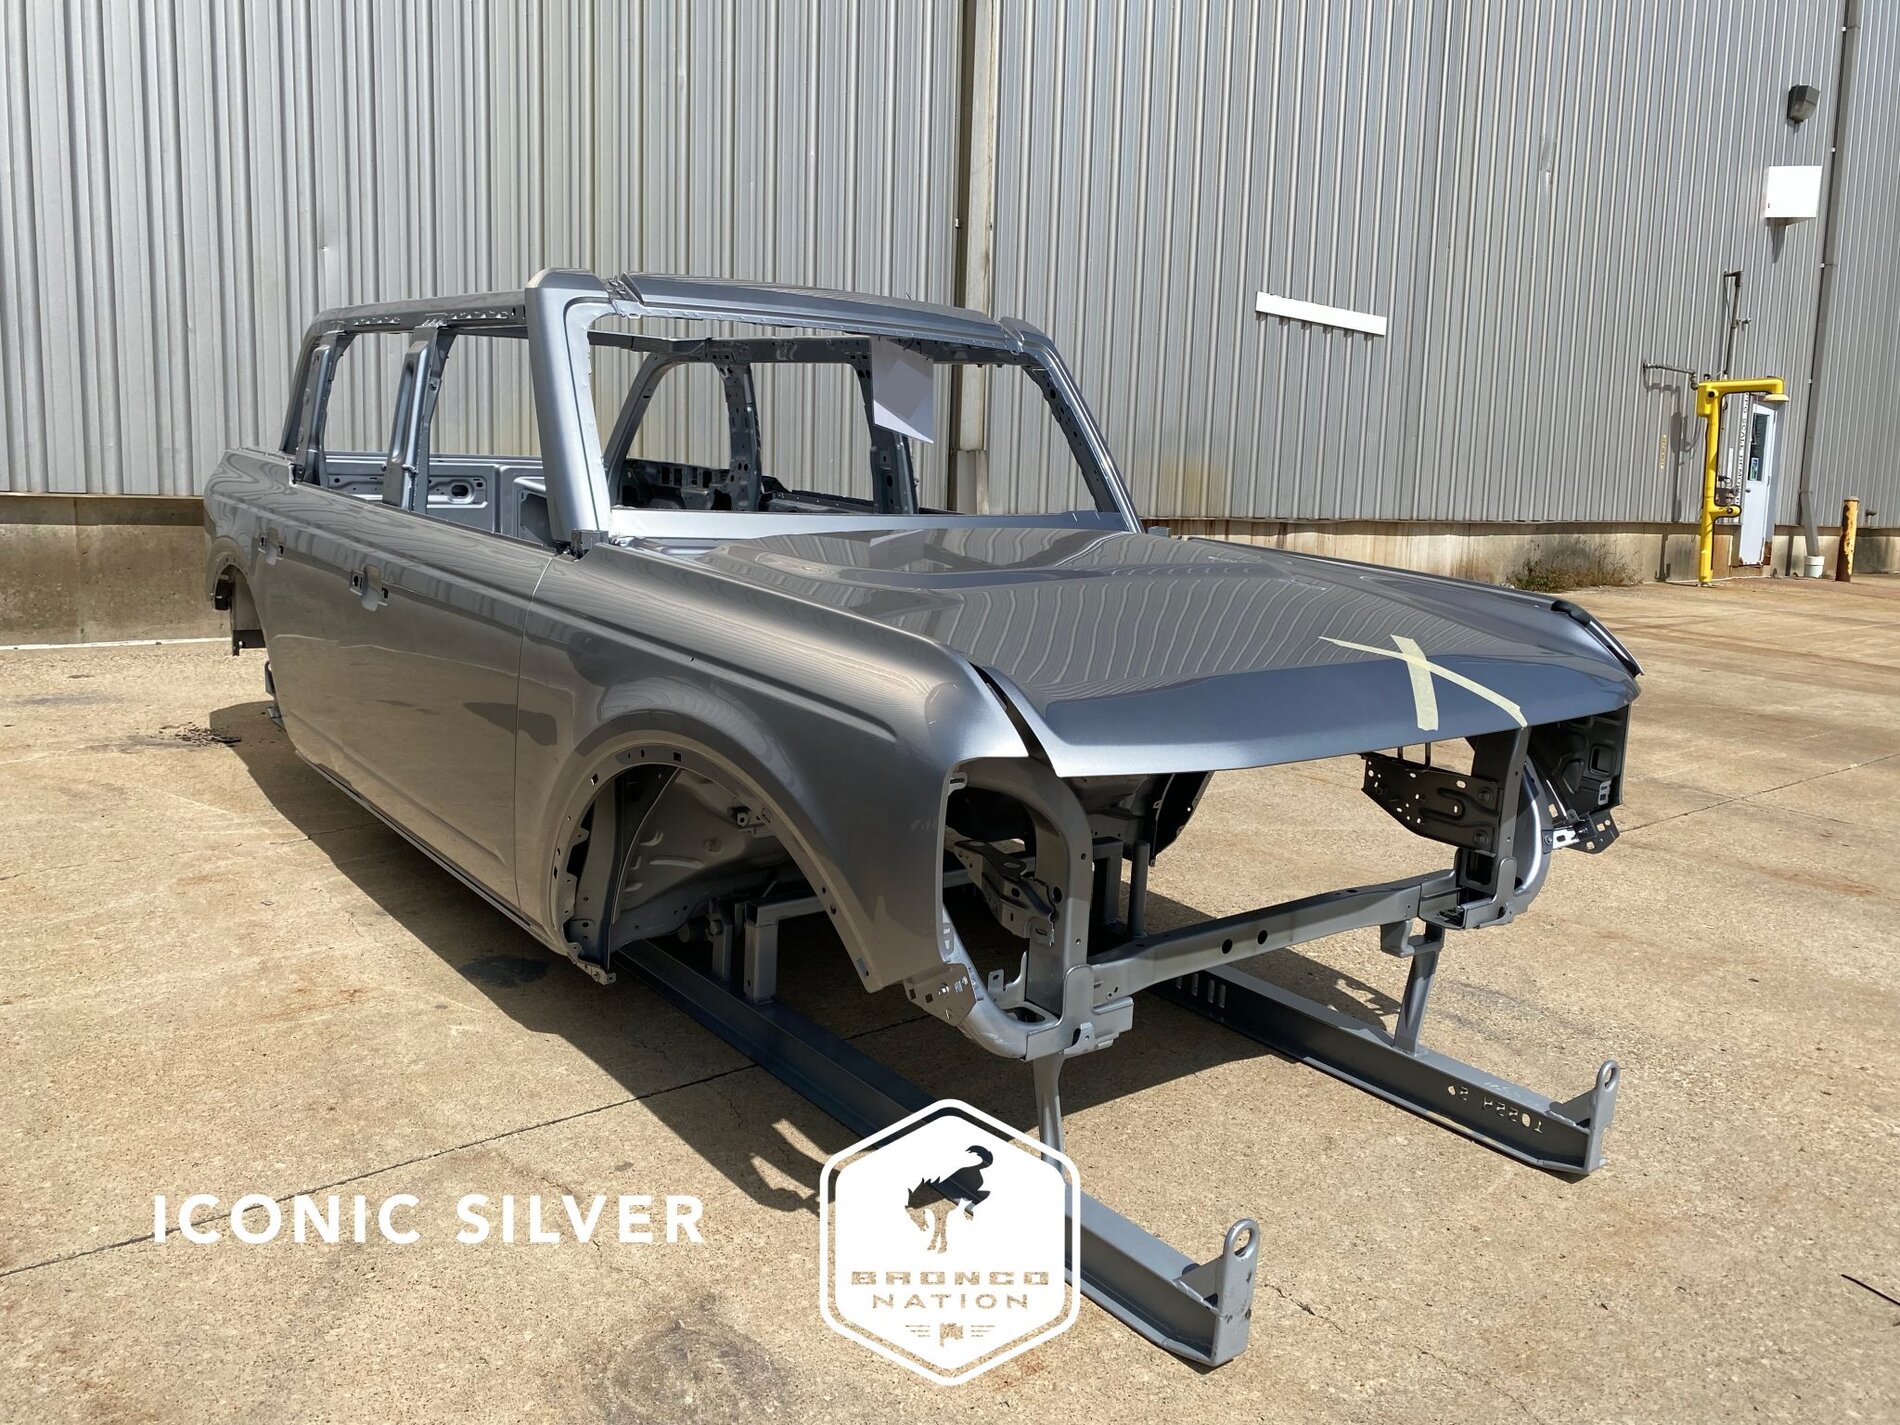 2021 Bronco Iconic Silver painted body sample.jpg